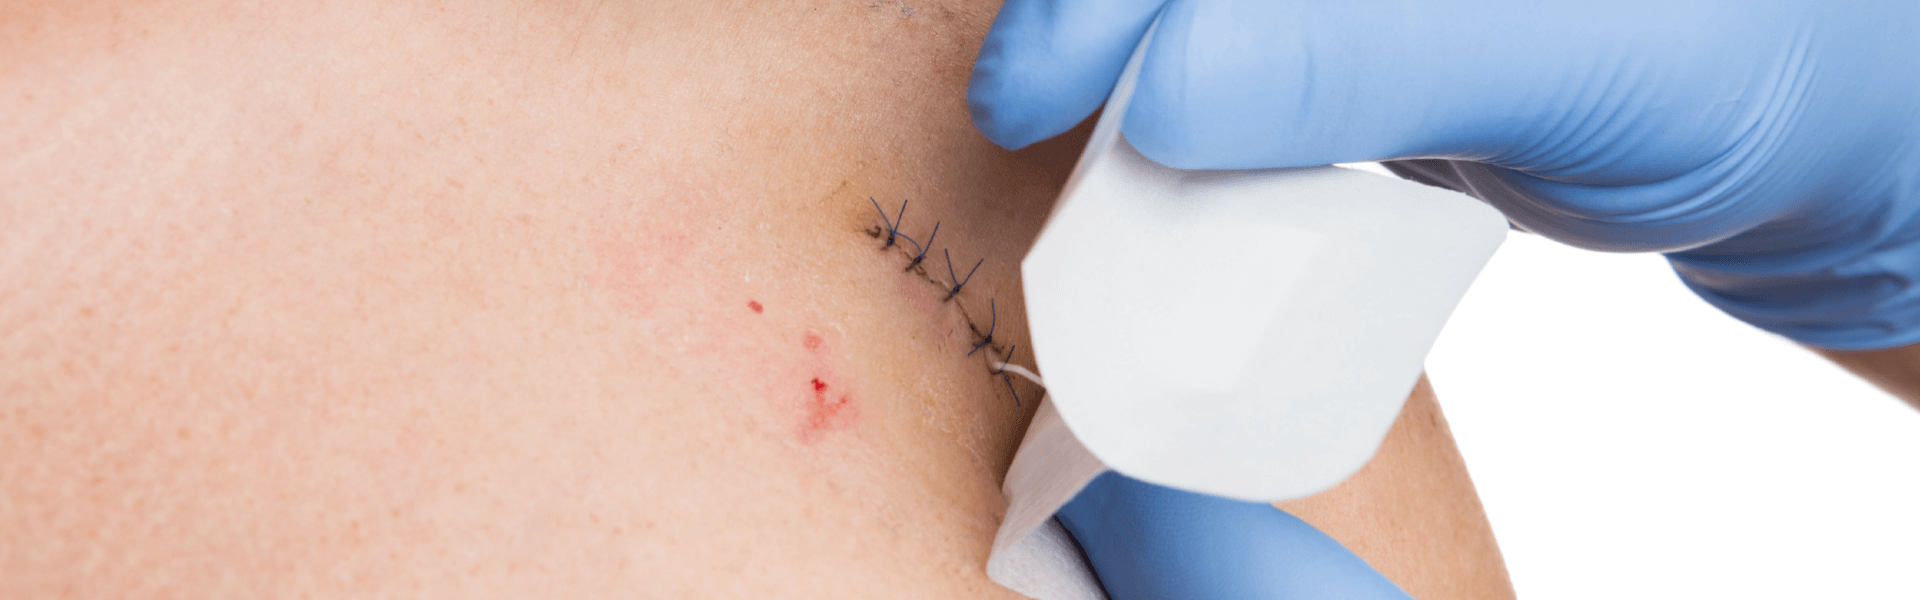 Suture Removal in Gurgaon